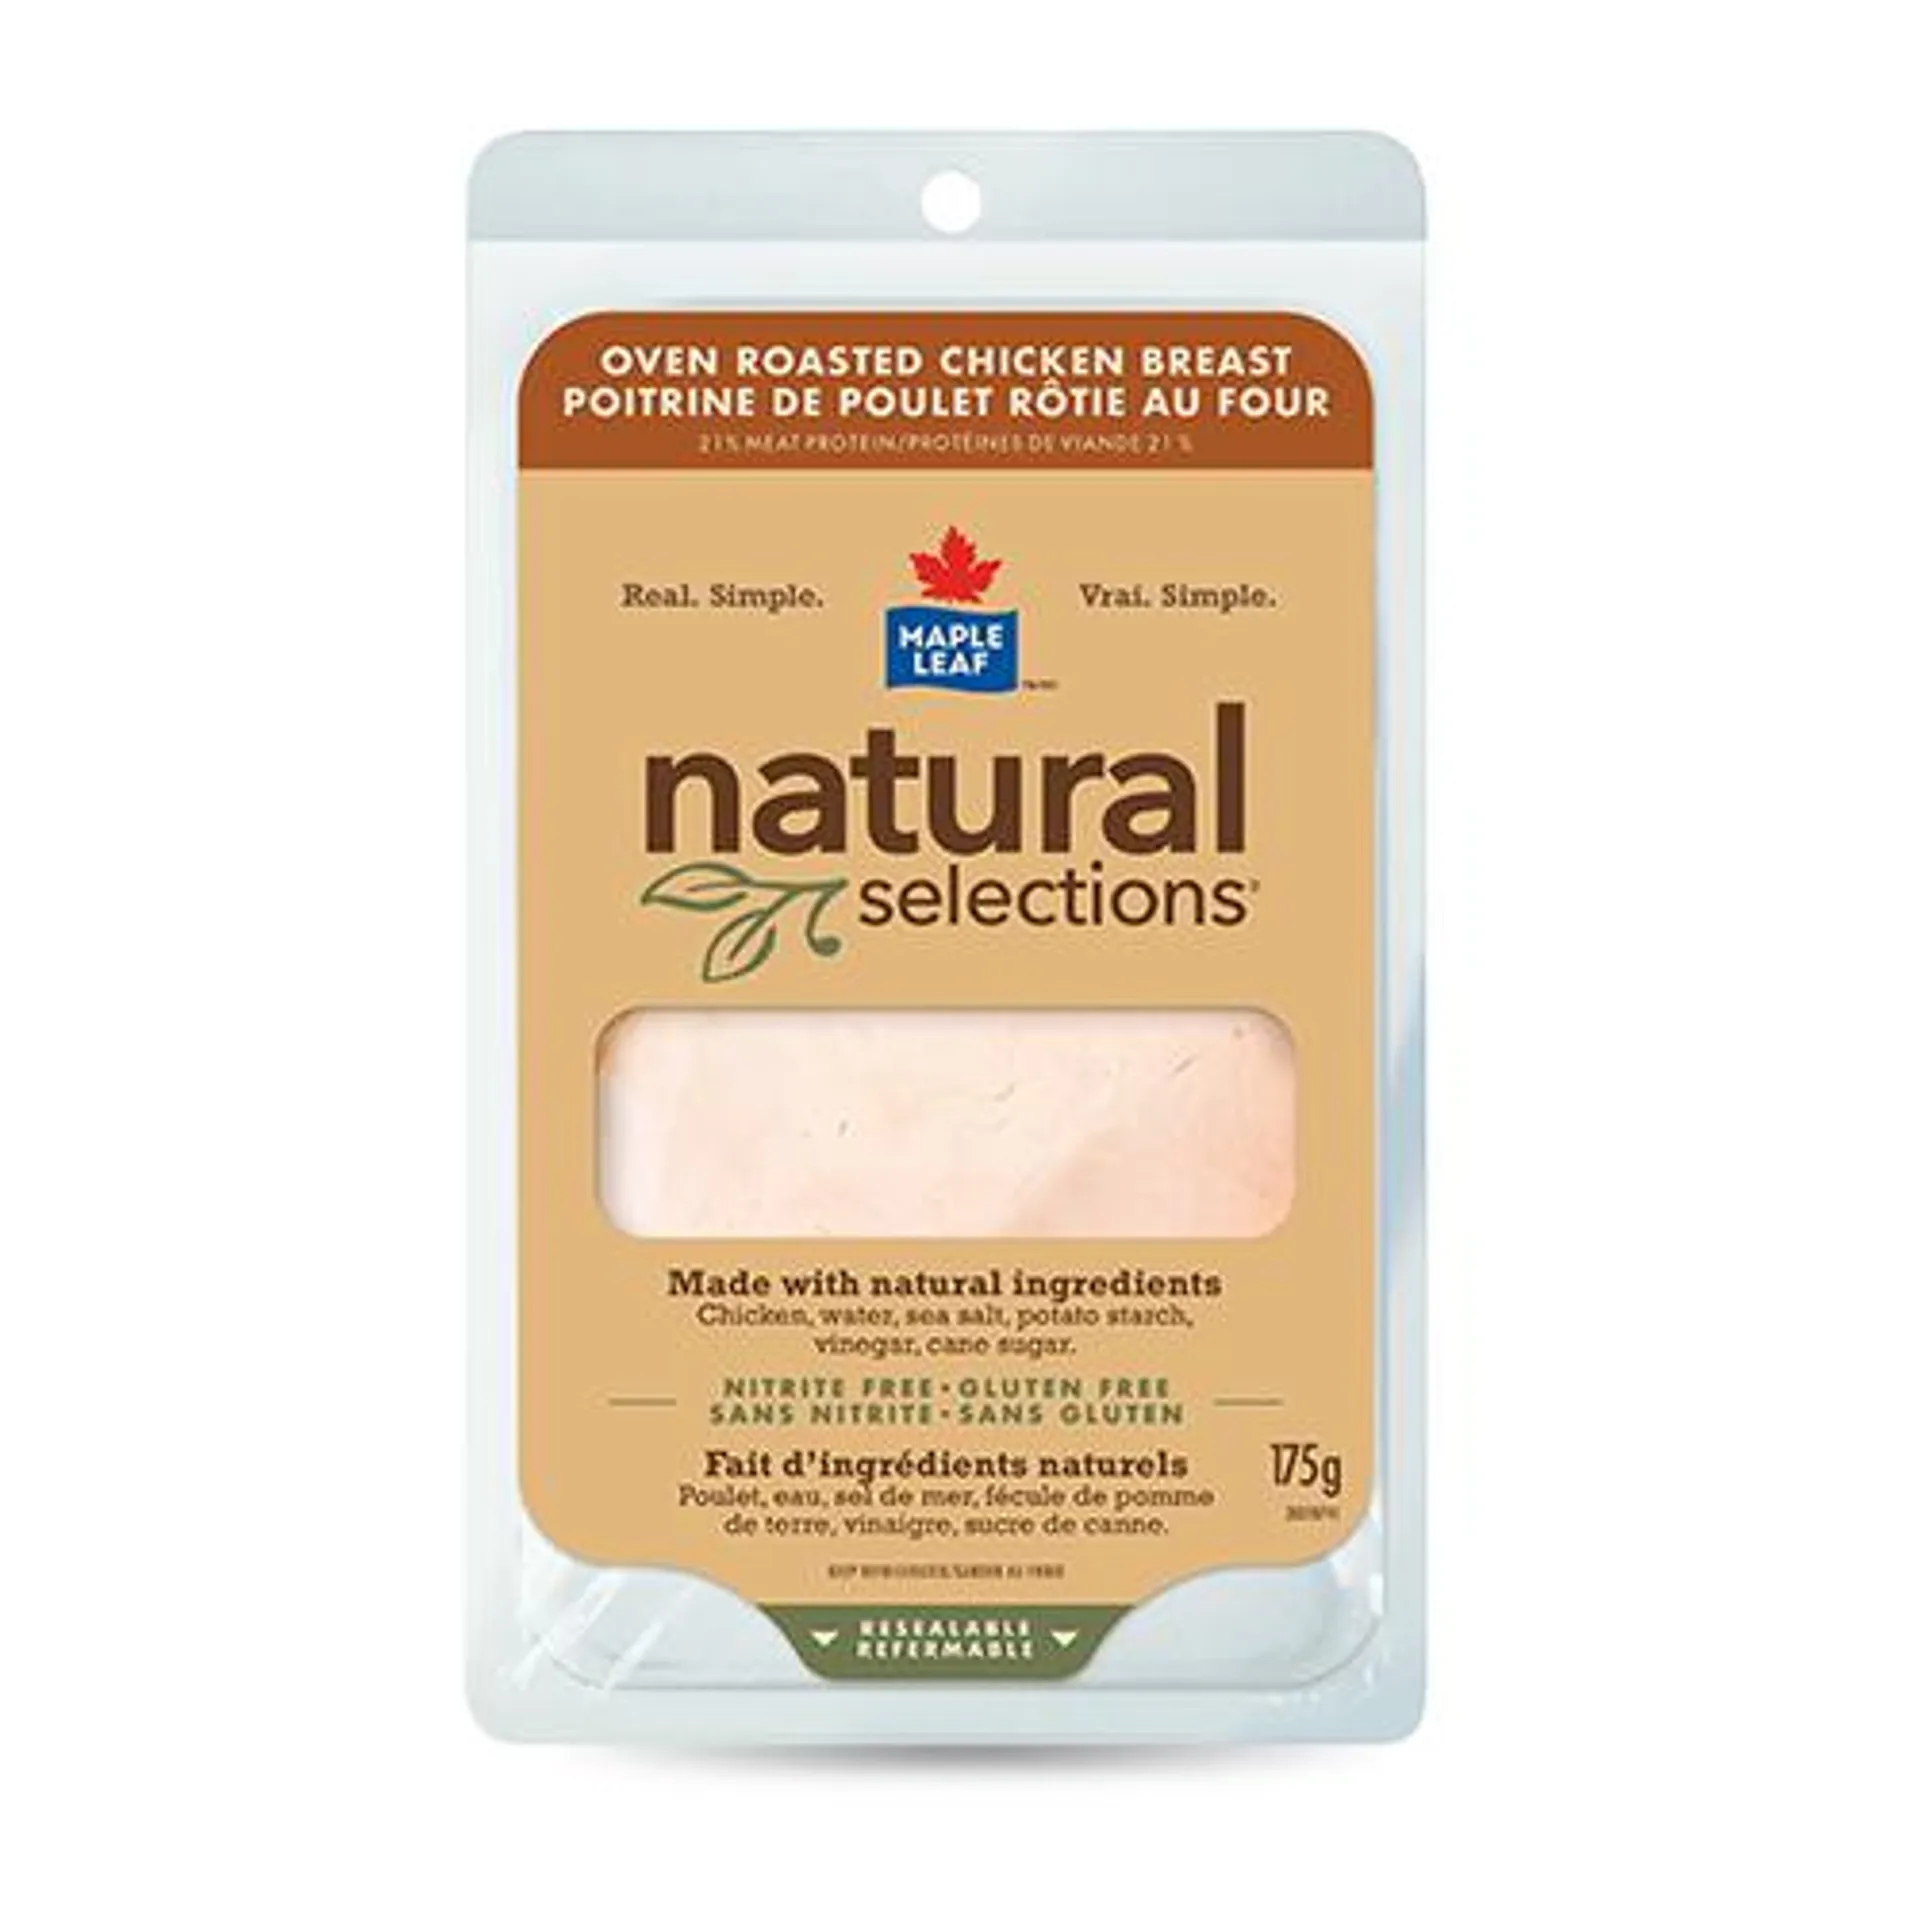 Maple Leaf Natural Selections Oven Roasted Chicken Breast 175g